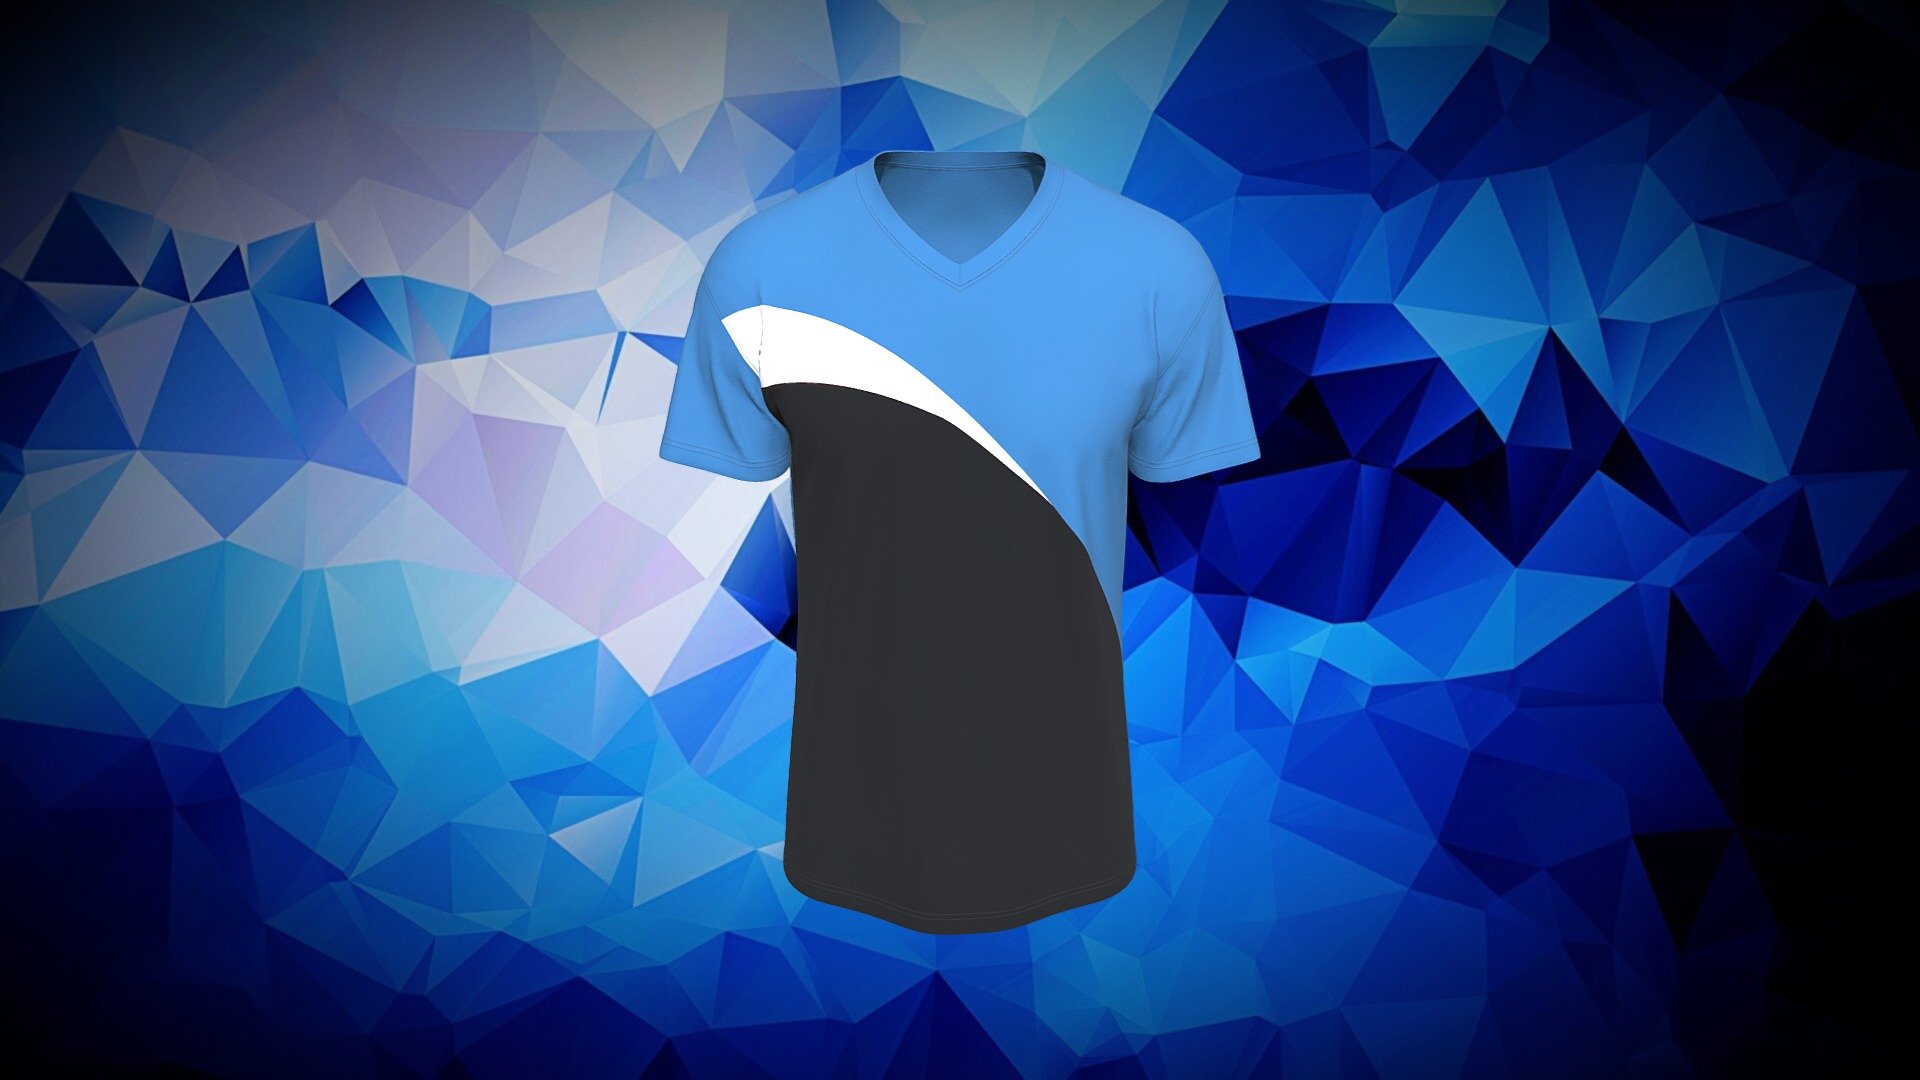 Cloth Title = Sporty V-neck t-shirt Blue 

SKU = DG100105 

Category = Unisex 

Product Type = T-Shirt 

Cloth Length = Regular 

Body Fit = Regular Fit 

Occasion = Casual  

Sleeve Style = Set In Sleeve 


Our Services:

3D Apparel Design.

OBJ,FBX,GLTF Making with High/Low Poly.

Fabric Digitalization.

Mockup making.

3D Teck Pack.

Pattern Making.

2D Illustration.

Cloth Animation and 360 Spin Video.


Contact us:- 

Email: info@digitalfashionwear.com 

Website: https://digitalfashionwear.com 

WhatsApp No: +8801759350445 


We designed all the types of cloth specially focused on product visualization, e-commerce, fitting, and production. 

We will design: 

T-shirts 

Polo shirts 

Hoodies 

Sweatshirt 

Jackets 

Shirts 

TankTops 

Trousers 

Bras 

Underwear 

Blazer 

Aprons 

Leggings 

and All Fashion items. 





Our goal is to make sure what we provide you, meets your demand 3d model